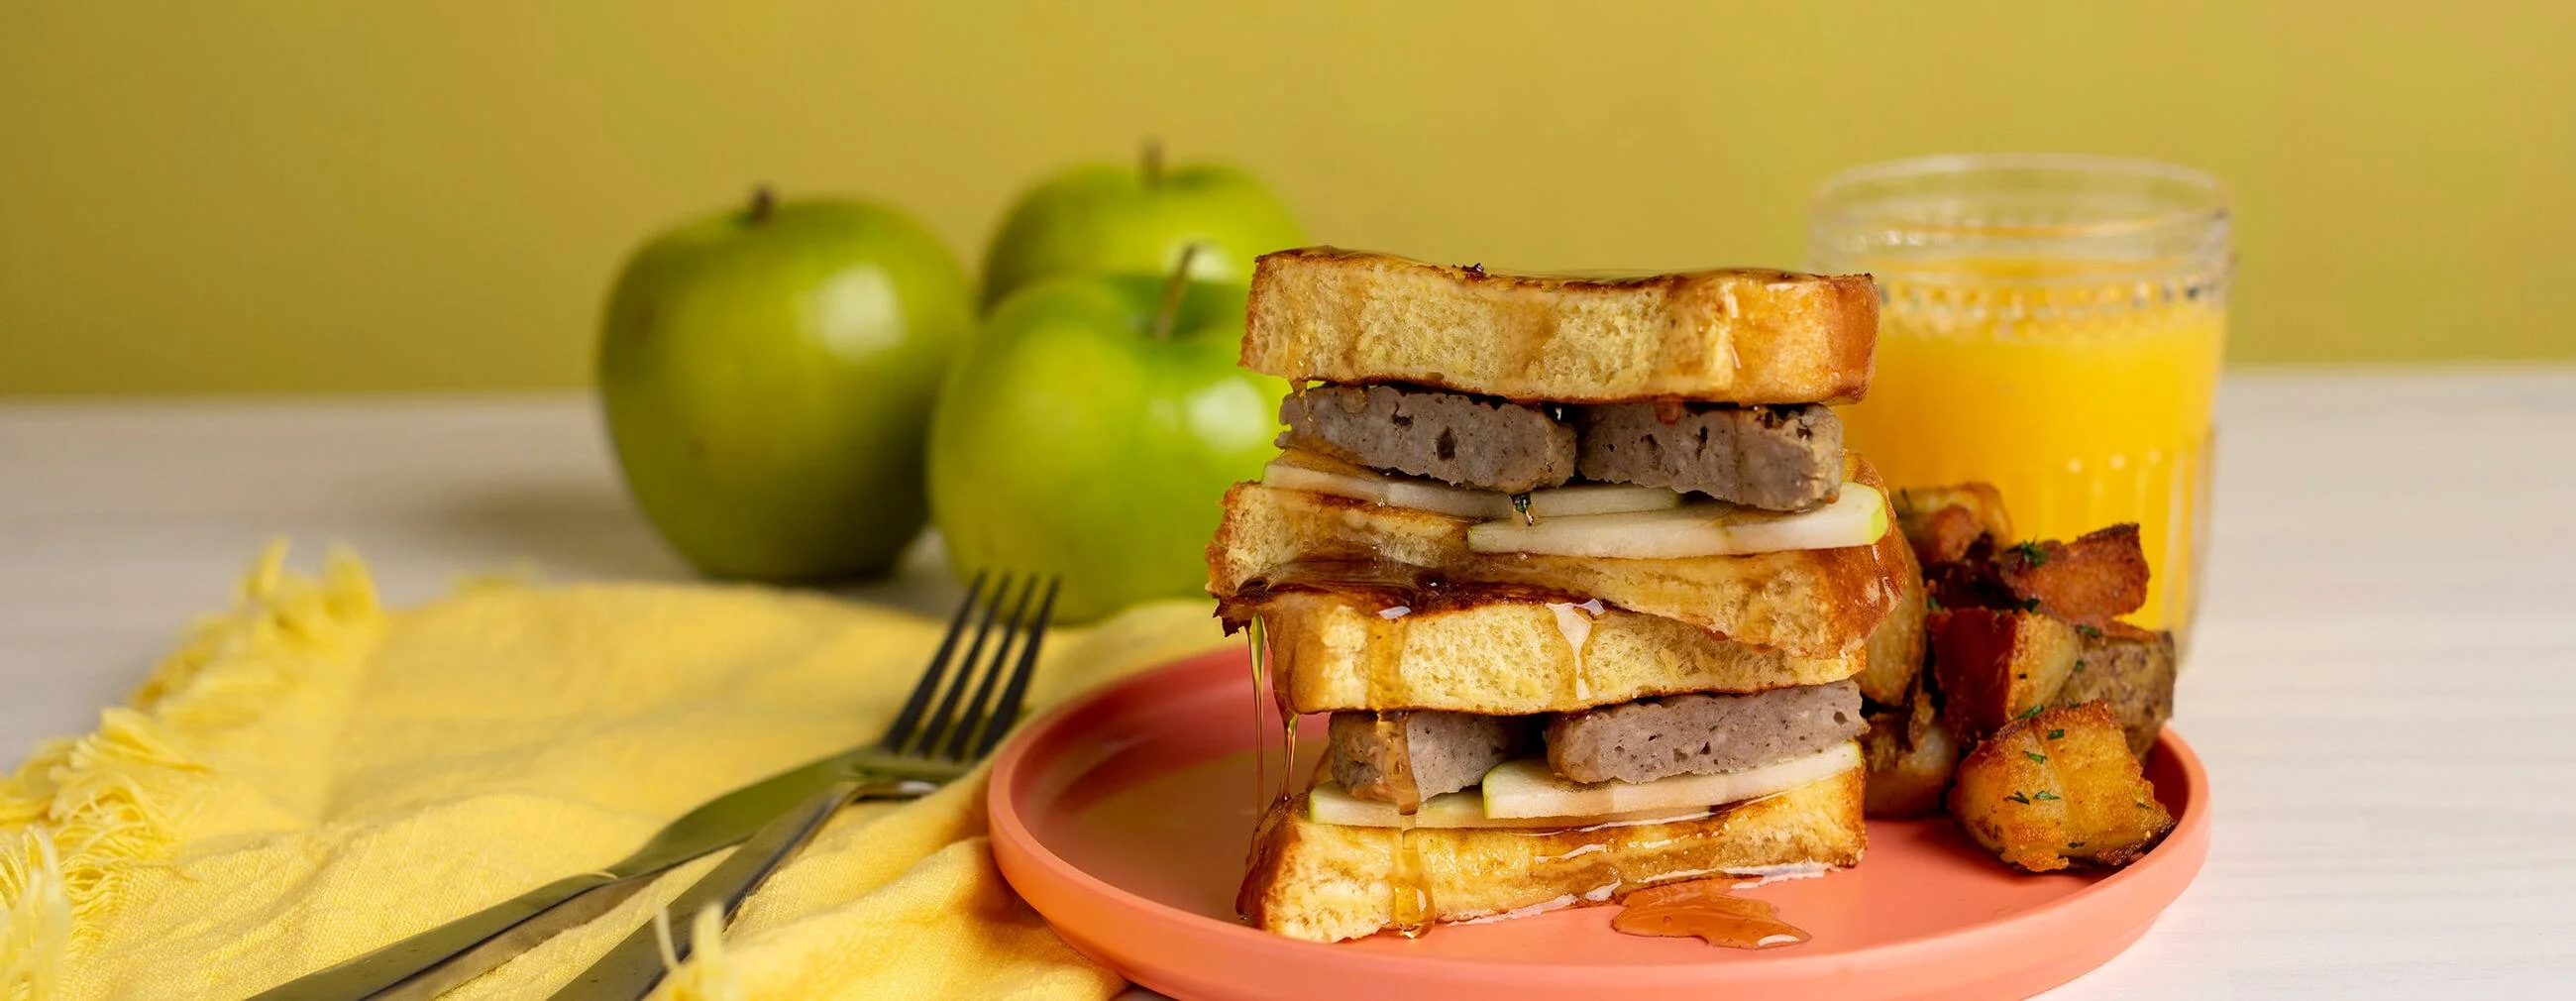 Banquet® Sausage and Apple Stuffed French Toast image